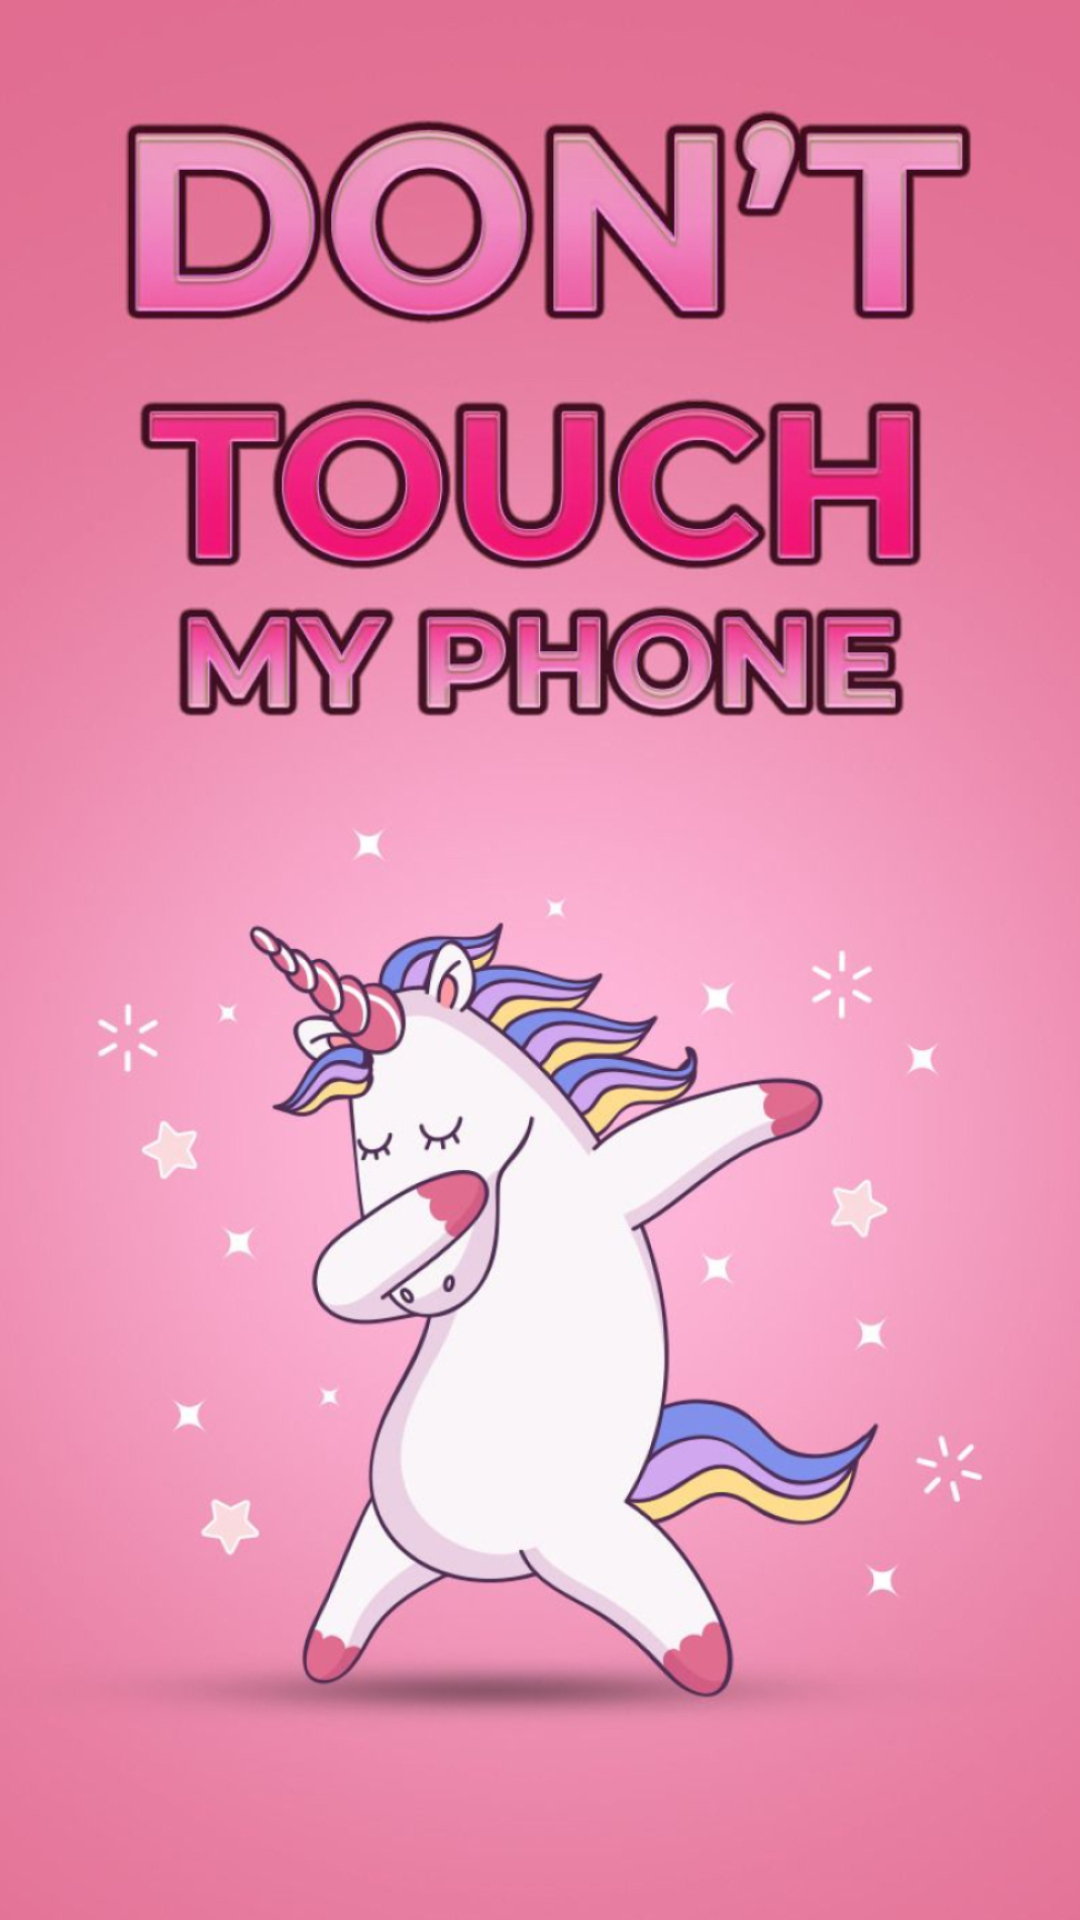 1080x1920 Cute Unicorn Mobile Wallpapers | Phone wallpaper pink, Cute mobile wallpapers, Dont touch my phone wallpapers